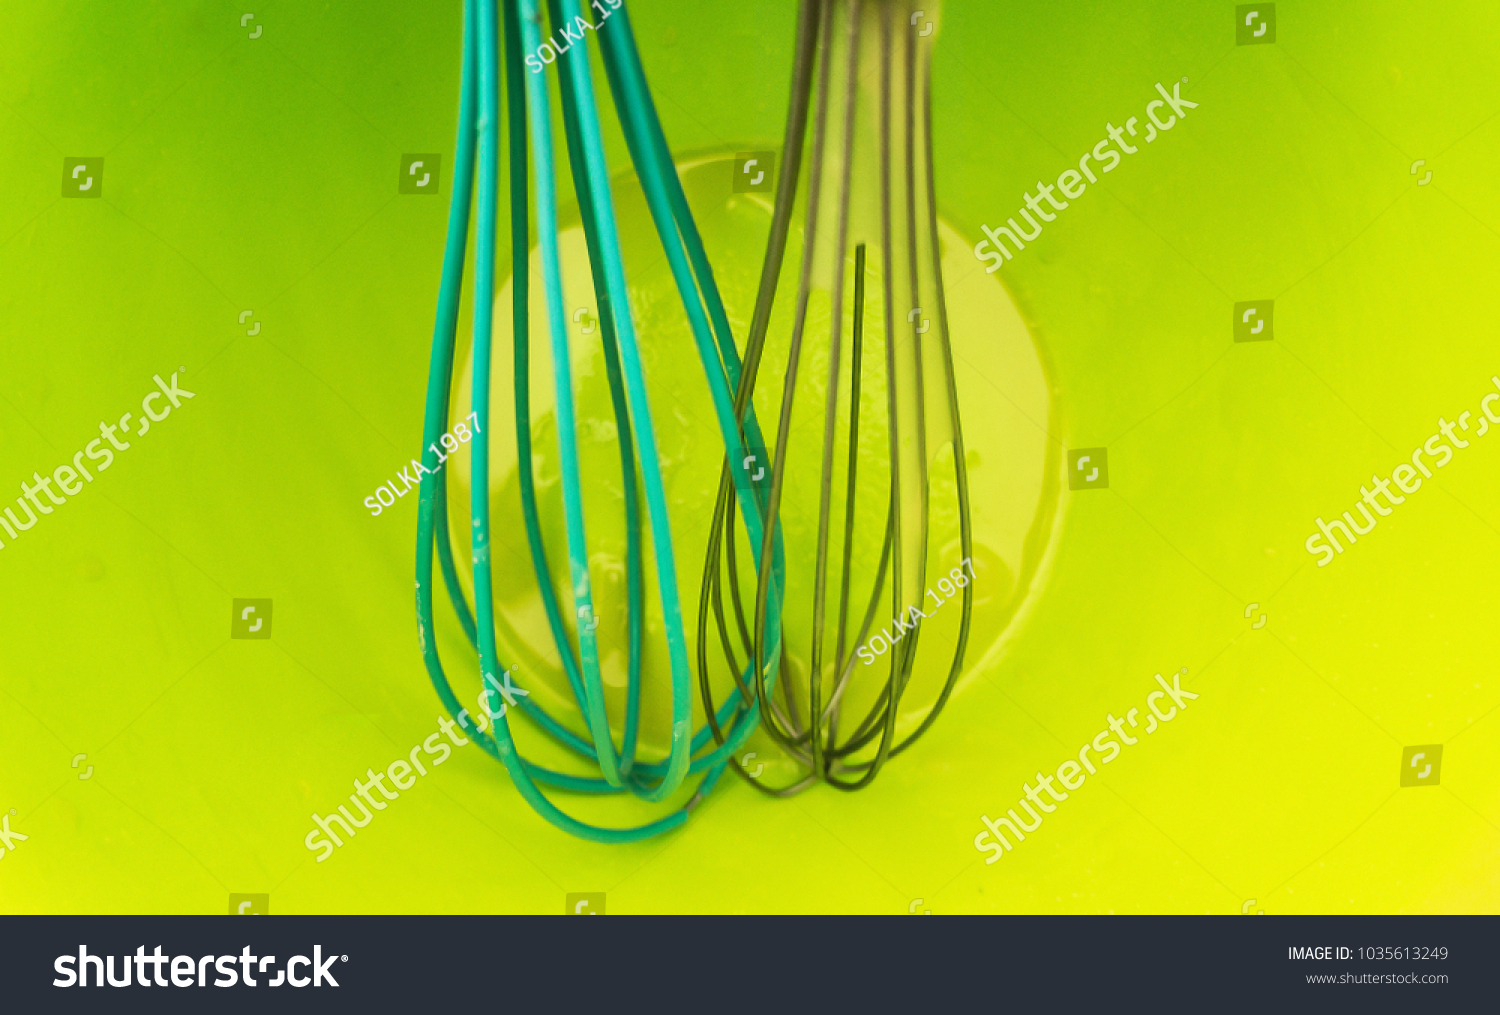 Two whisks for whipping #1035613249